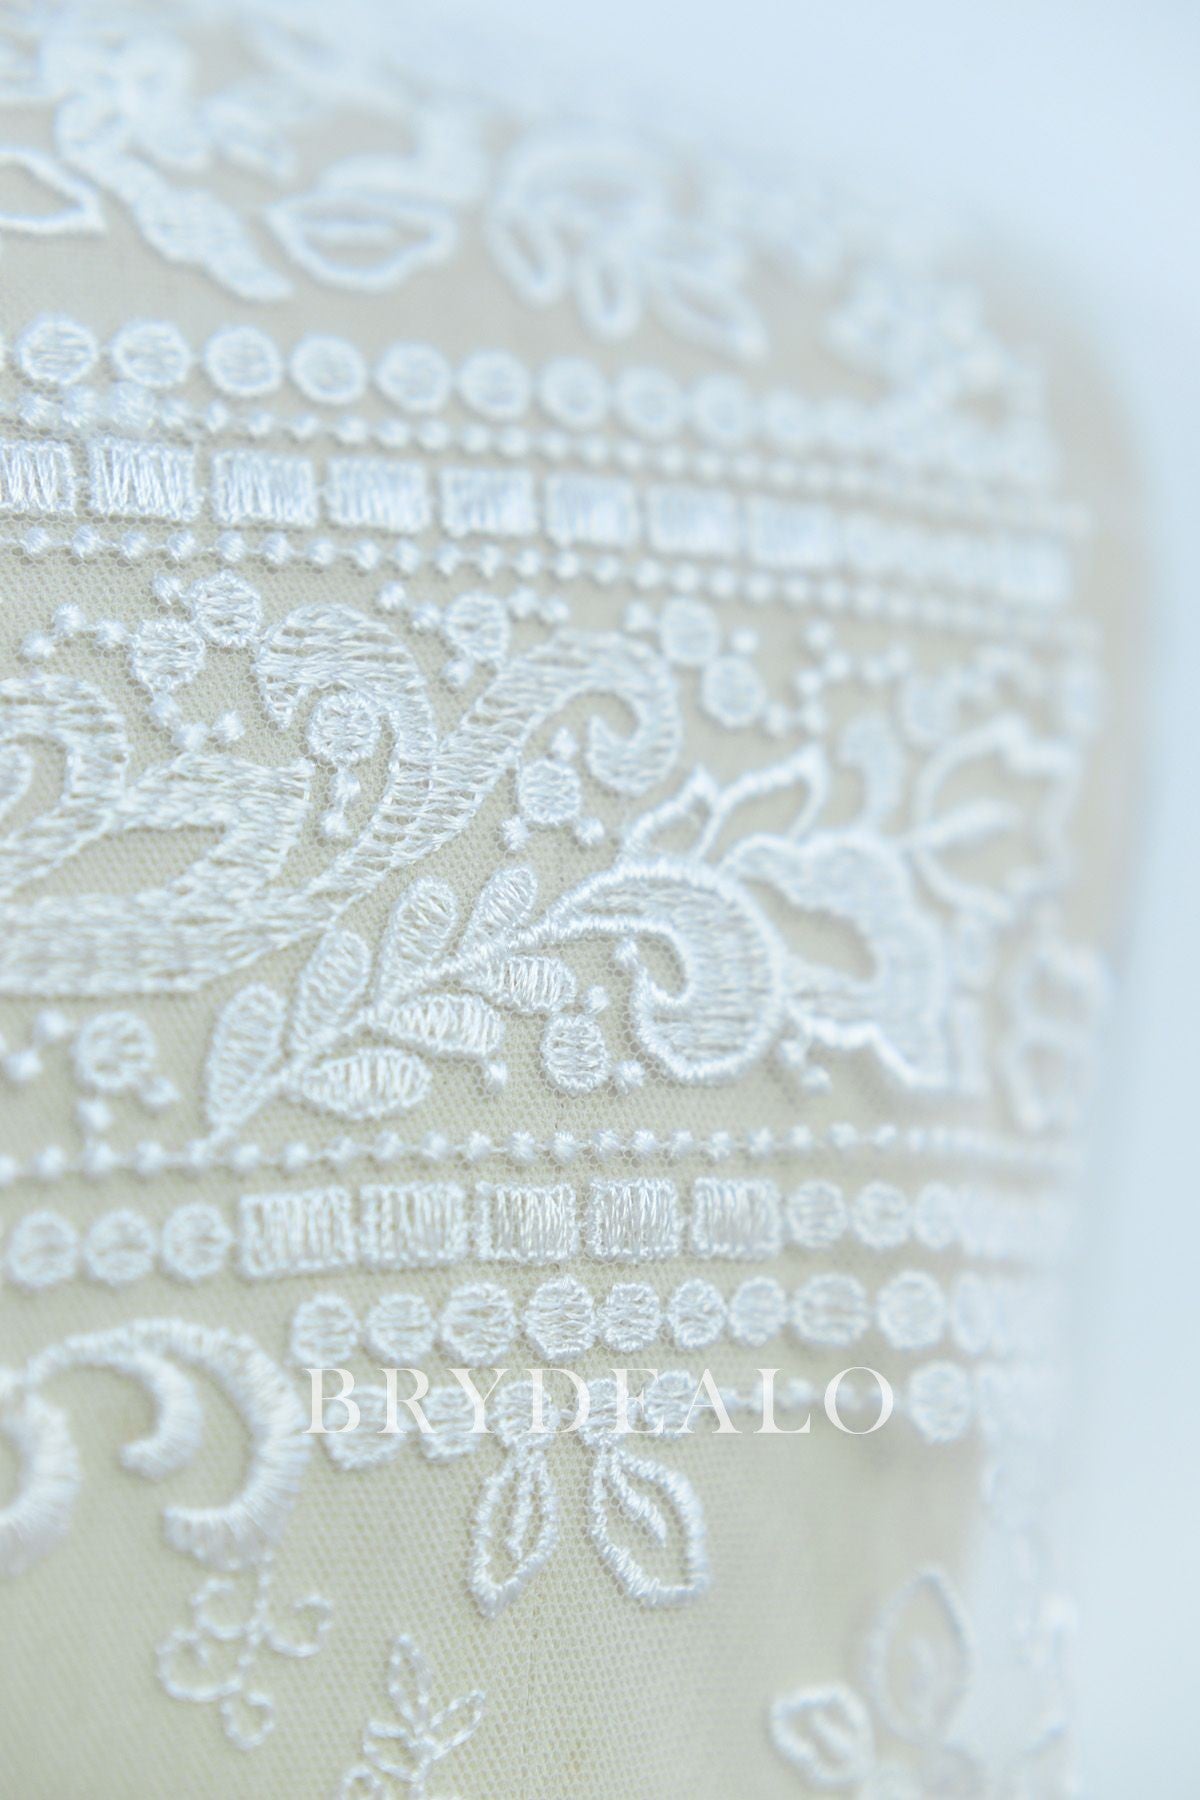 Botanic Apparel Lace Fabric online for Wholesale